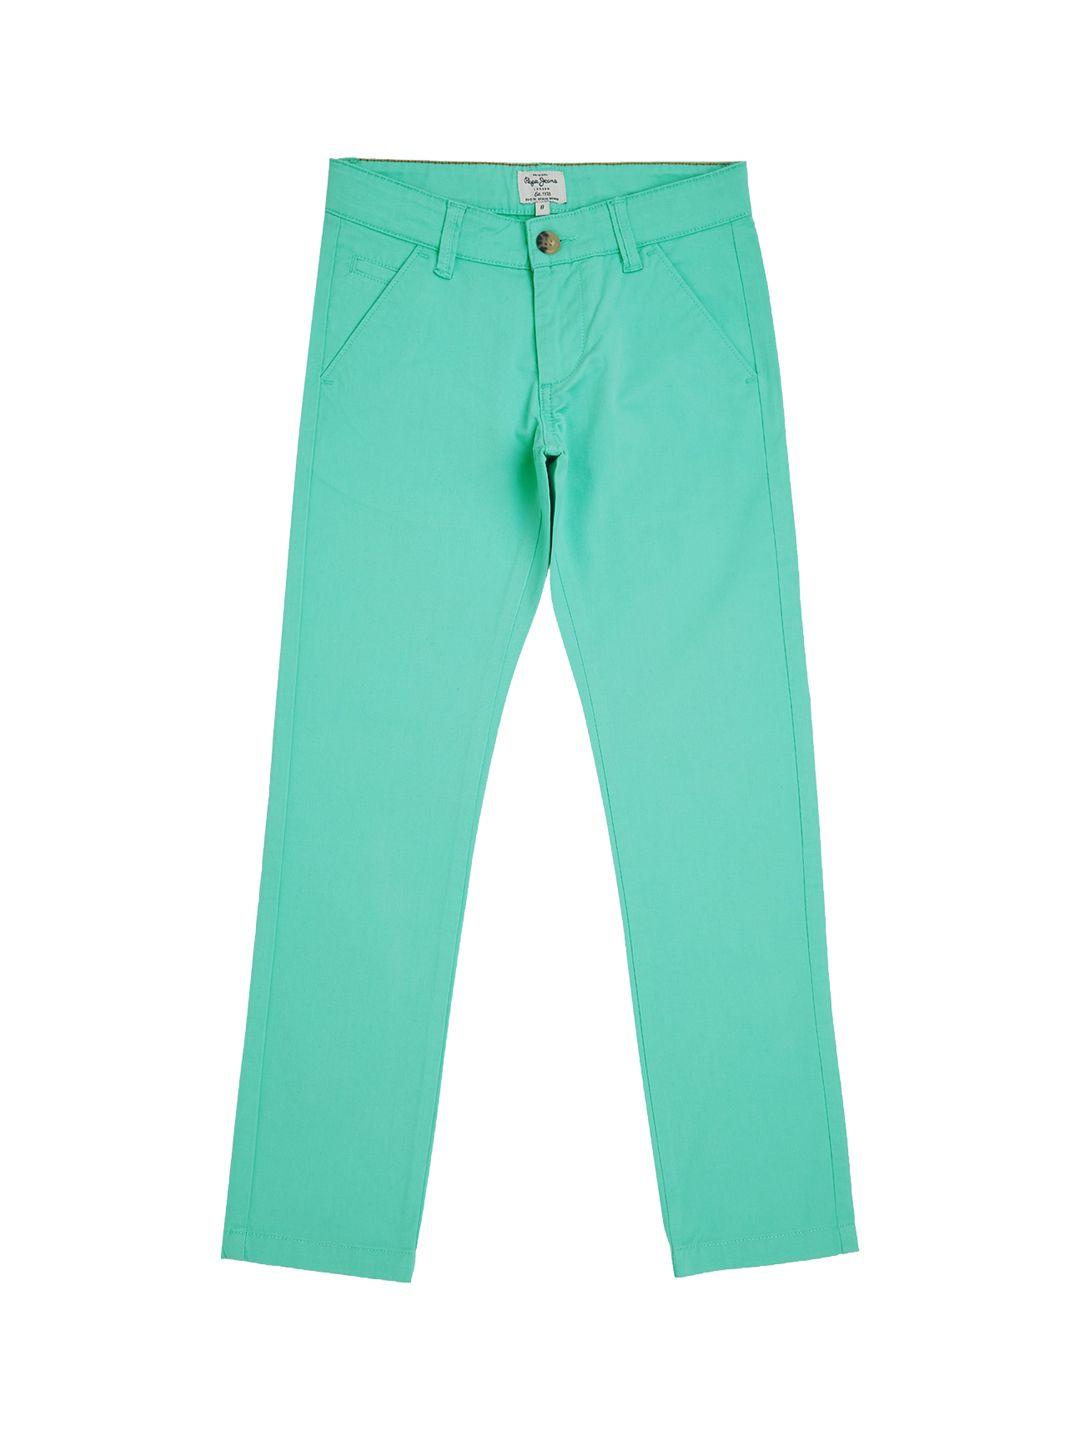 pepe jeans boys sea green regular fit winter chinos trousers